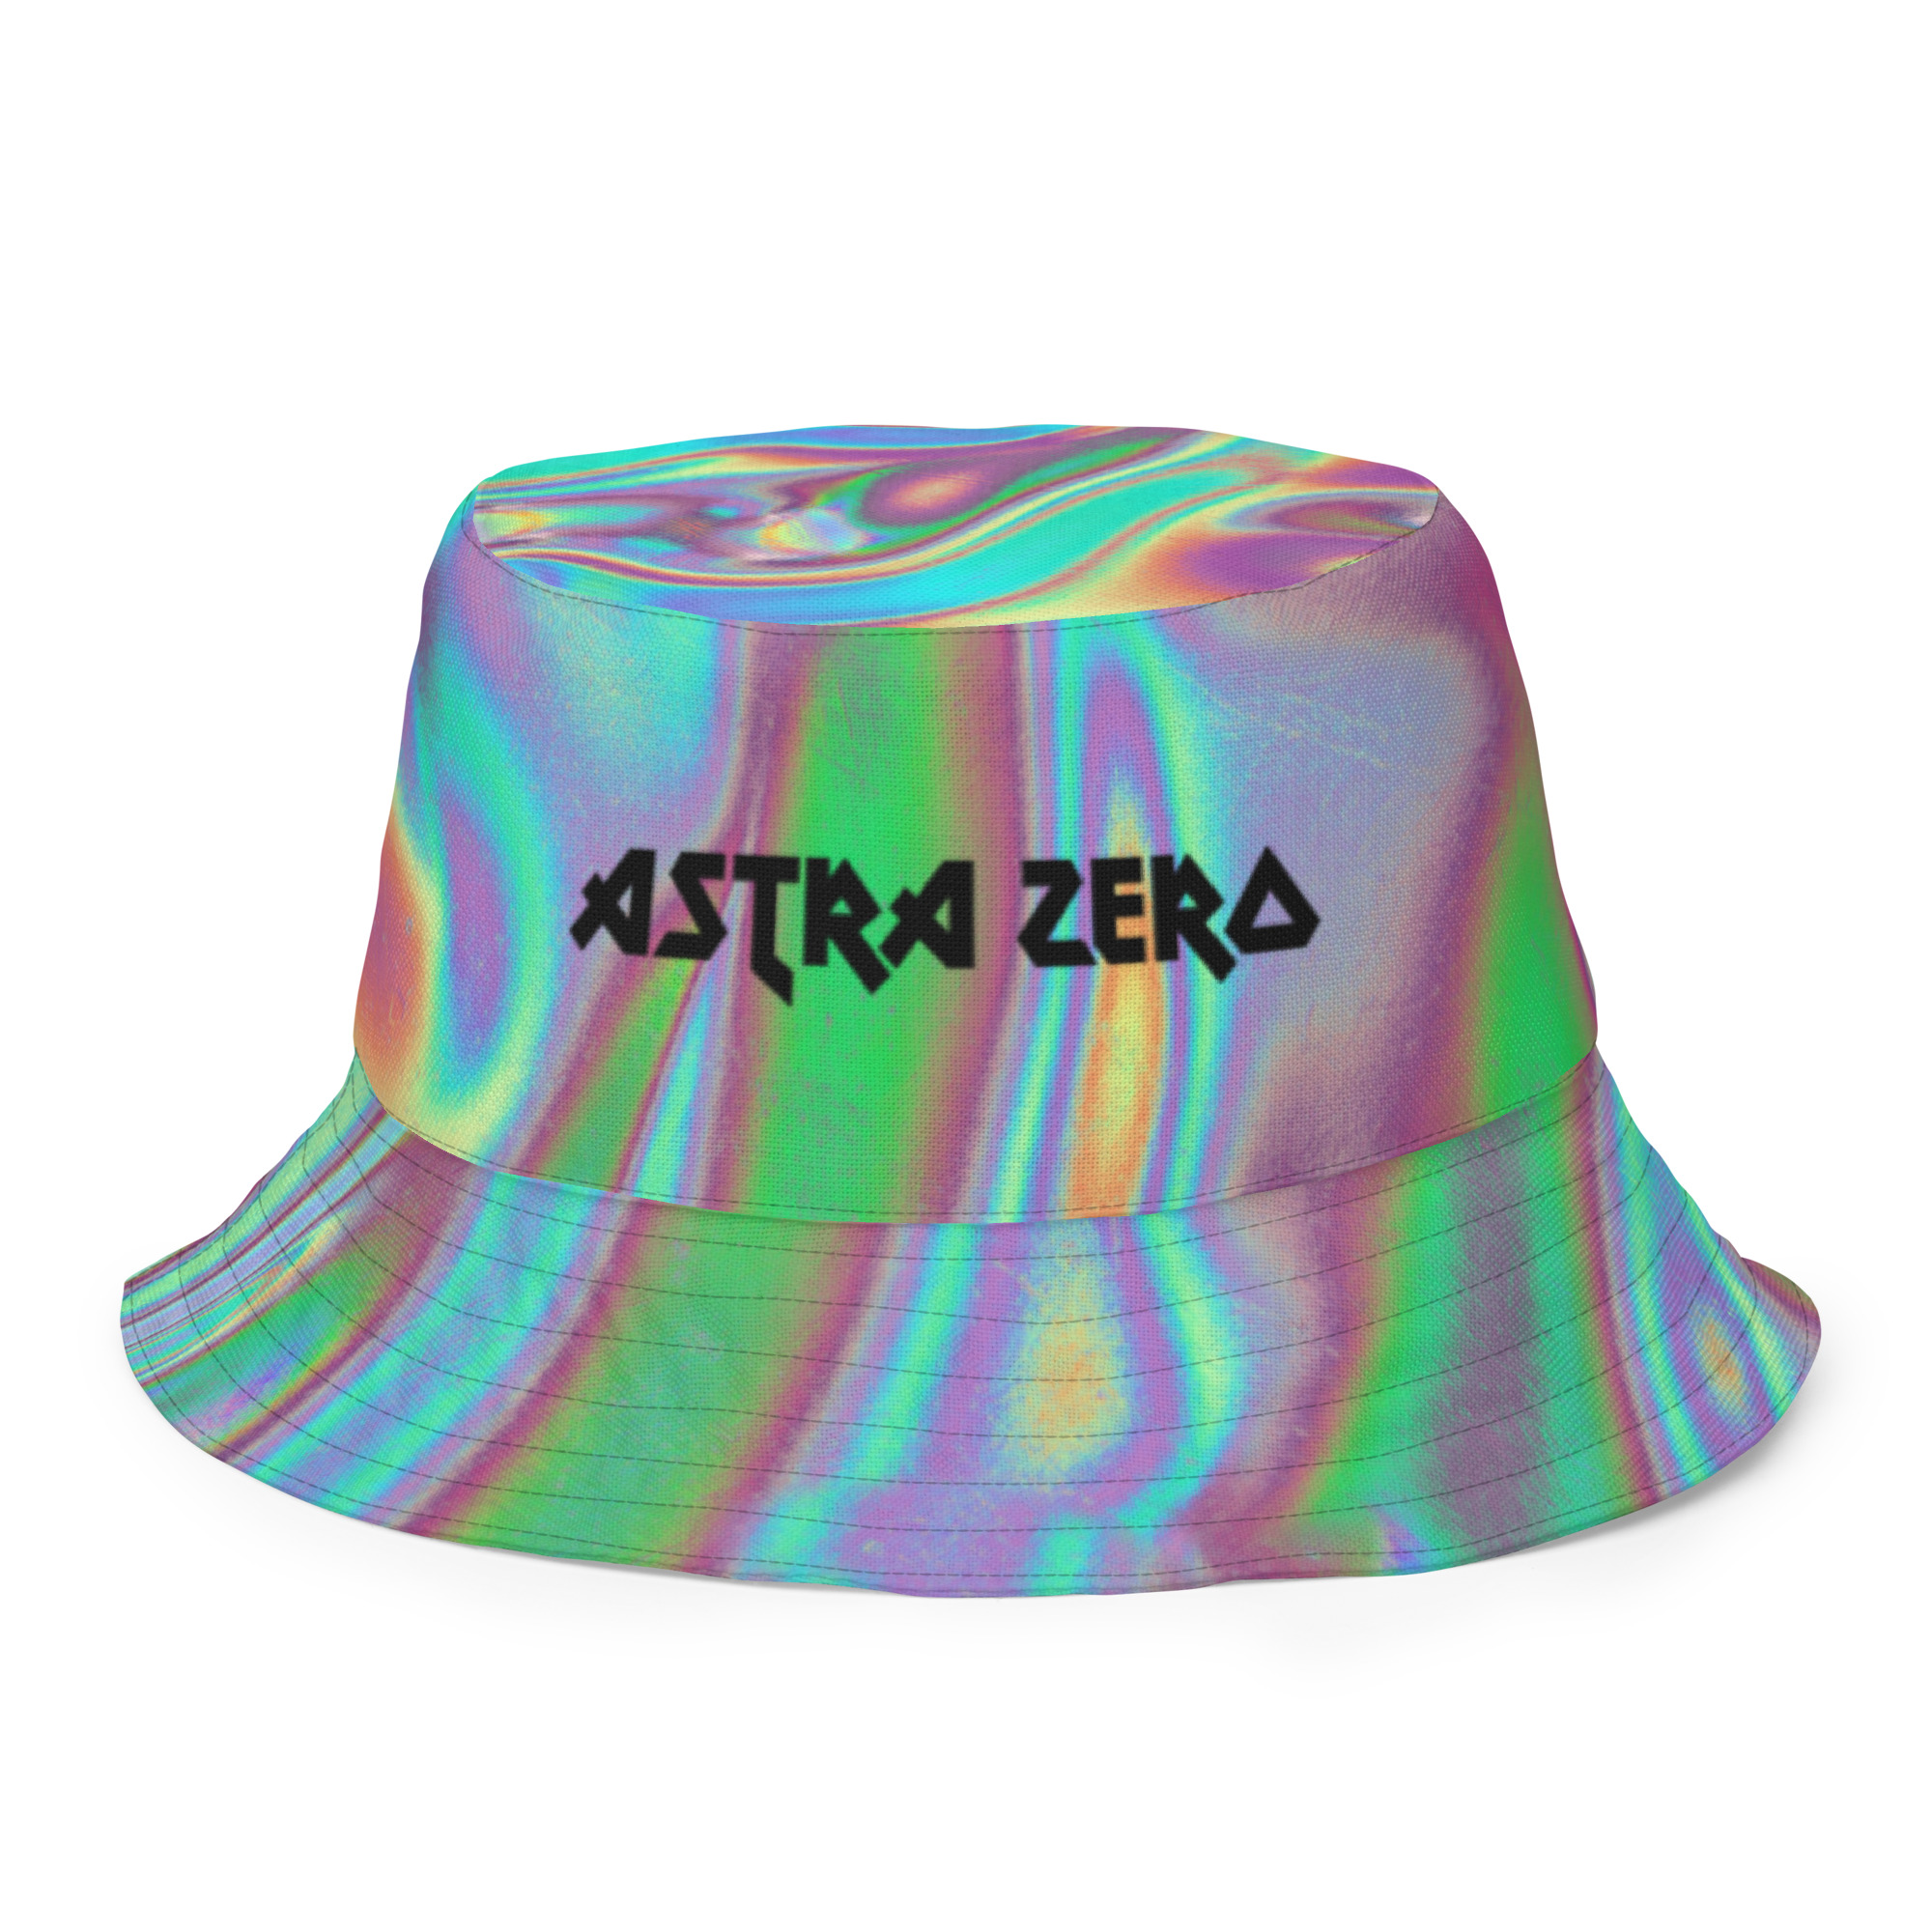 Featured image for “FauxHoloChaos - Reversible bucket hat”